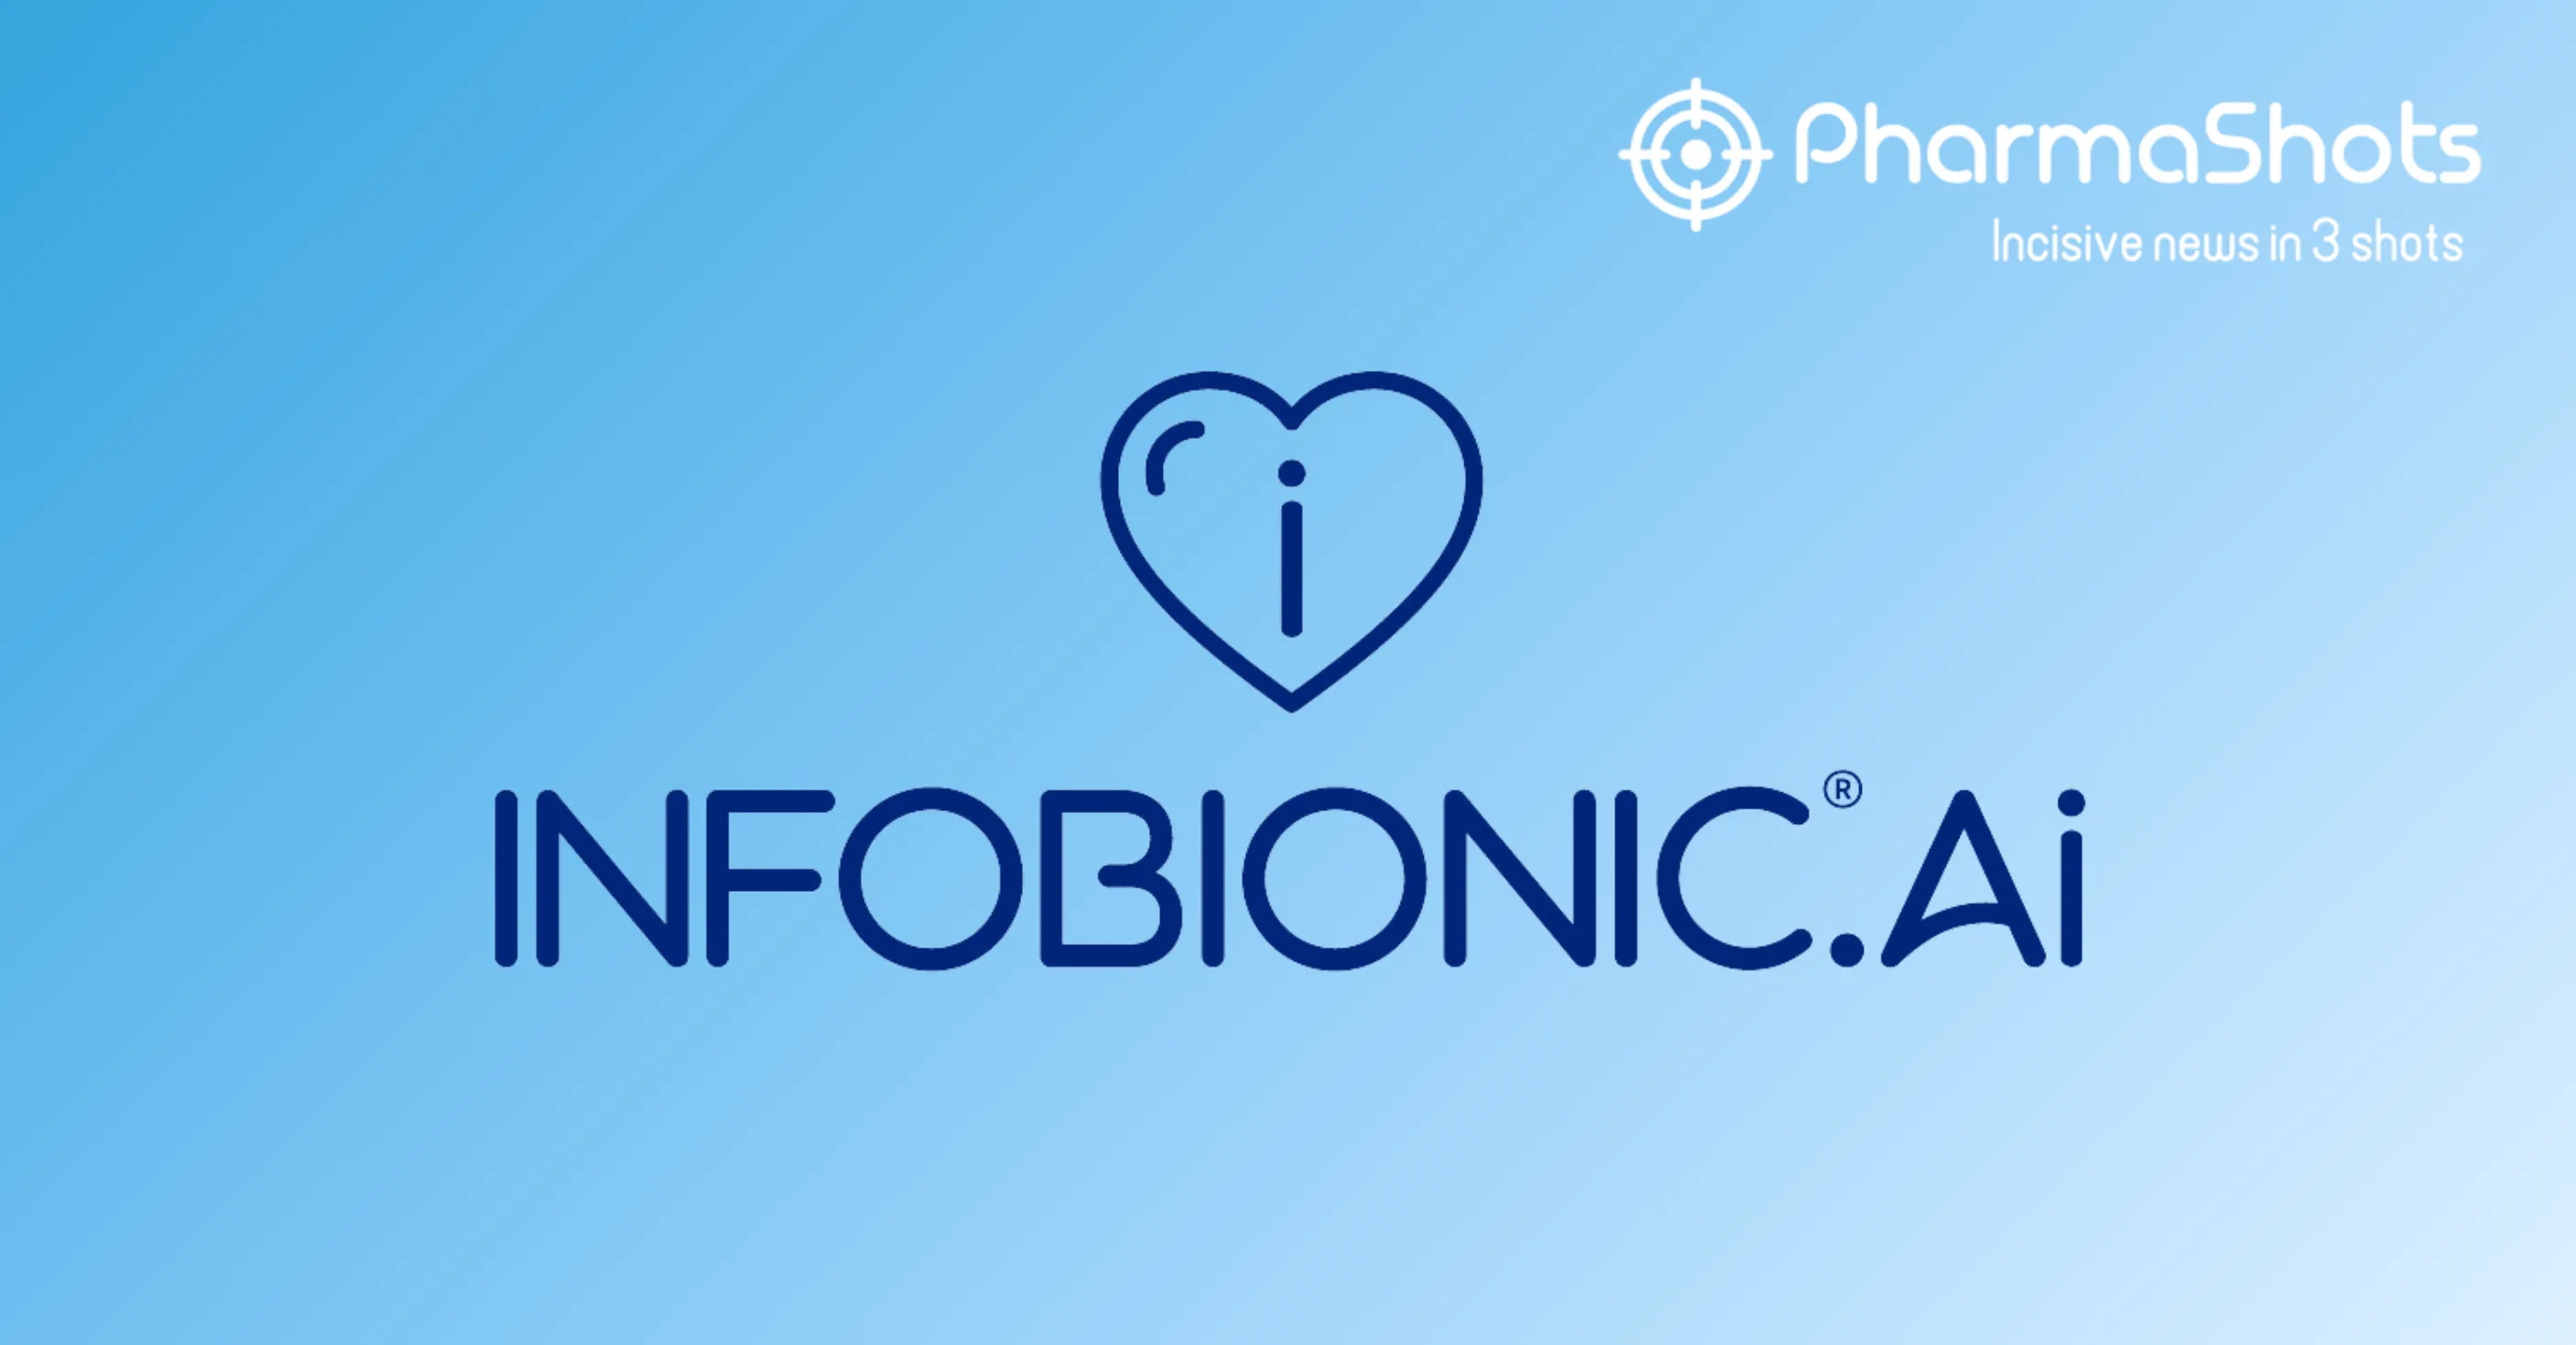 InfoBionic.Ai Collaborates with Anumana to Advance AI-Based Technology for Early Detection of Cardiac Diseases